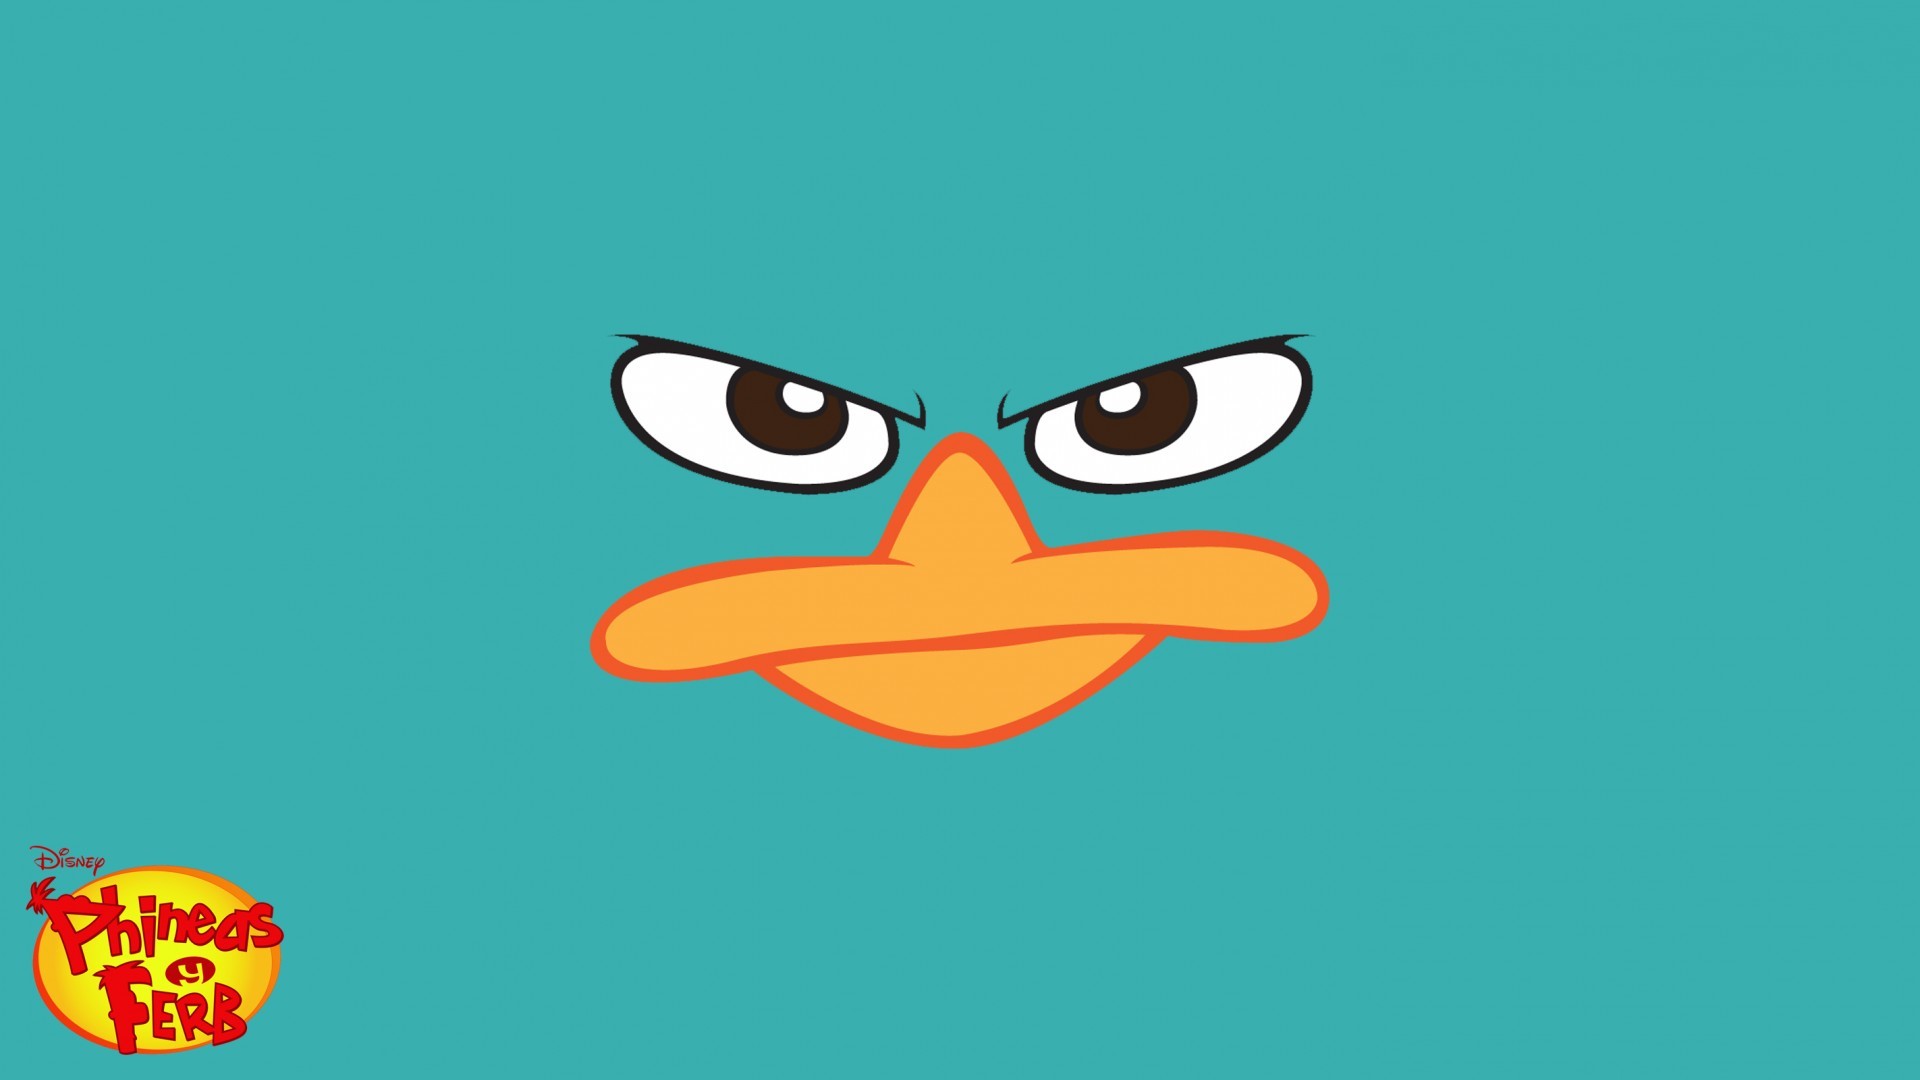 Perry the Platypus Wallpaper.